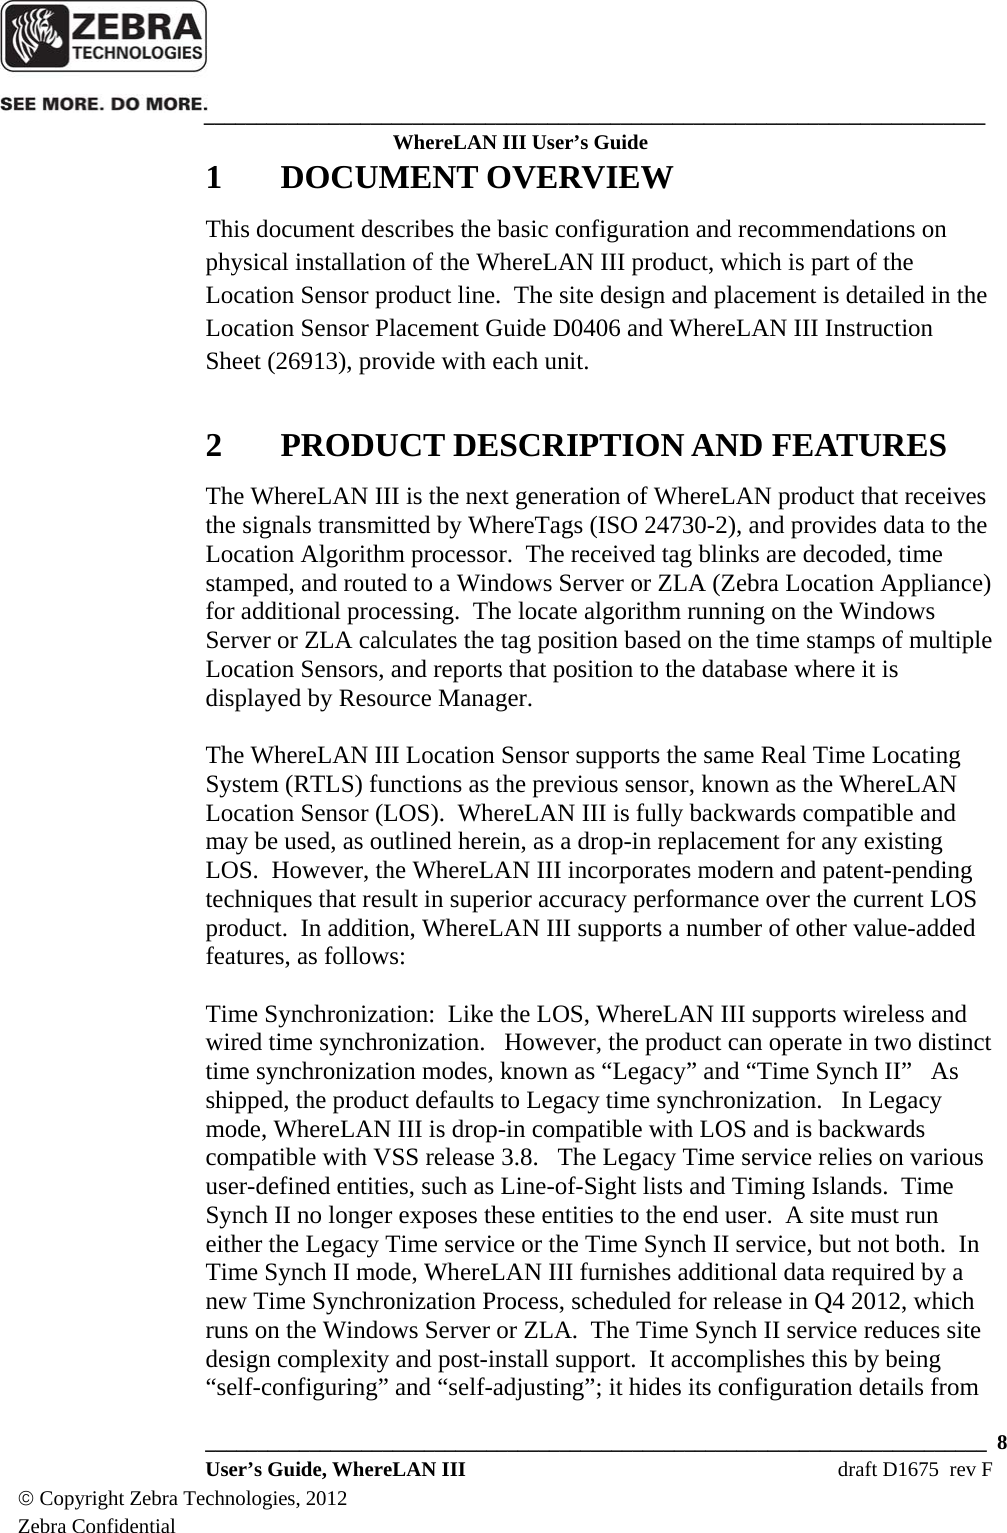    ___________________________________________________________________________ WhereLAN III User’s Guide  ___________________________________________________________________________  8  User’s Guide, WhereLAN III  draft D1675  rev F © Copyright Zebra Technologies, 2012 Zebra Confidential 1 DOCUMENT OVERVIEW This document describes the basic configuration and recommendations on physical installation of the WhereLAN III product, which is part of the Location Sensor product line.  The site design and placement is detailed in the Location Sensor Placement Guide D0406 and WhereLAN III Instruction Sheet (26913), provide with each unit.  2 PRODUCT DESCRIPTION AND FEATURES The WhereLAN III is the next generation of WhereLAN product that receives the signals transmitted by WhereTags (ISO 24730-2), and provides data to the Location Algorithm processor.  The received tag blinks are decoded, time stamped, and routed to a Windows Server or ZLA (Zebra Location Appliance) for additional processing.  The locate algorithm running on the Windows Server or ZLA calculates the tag position based on the time stamps of multiple Location Sensors, and reports that position to the database where it is displayed by Resource Manager.  The WhereLAN III Location Sensor supports the same Real Time Locating System (RTLS) functions as the previous sensor, known as the WhereLAN Location Sensor (LOS).  WhereLAN III is fully backwards compatible and may be used, as outlined herein, as a drop-in replacement for any existing LOS.  However, the WhereLAN III incorporates modern and patent-pending techniques that result in superior accuracy performance over the current LOS product.  In addition, WhereLAN III supports a number of other value-added features, as follows:  Time Synchronization:  Like the LOS, WhereLAN III supports wireless and wired time synchronization.   However, the product can operate in two distinct time synchronization modes, known as “Legacy” and “Time Synch II”   As shipped, the product defaults to Legacy time synchronization.   In Legacy mode, WhereLAN III is drop-in compatible with LOS and is backwards compatible with VSS release 3.8.   The Legacy Time service relies on various user-defined entities, such as Line-of-Sight lists and Timing Islands.  Time Synch II no longer exposes these entities to the end user.  A site must run either the Legacy Time service or the Time Synch II service, but not both.  In Time Synch II mode, WhereLAN III furnishes additional data required by a new Time Synchronization Process, scheduled for release in Q4 2012, which runs on the Windows Server or ZLA.  The Time Synch II service reduces site design complexity and post-install support.  It accomplishes this by being “self-configuring” and “self-adjusting”; it hides its configuration details from 